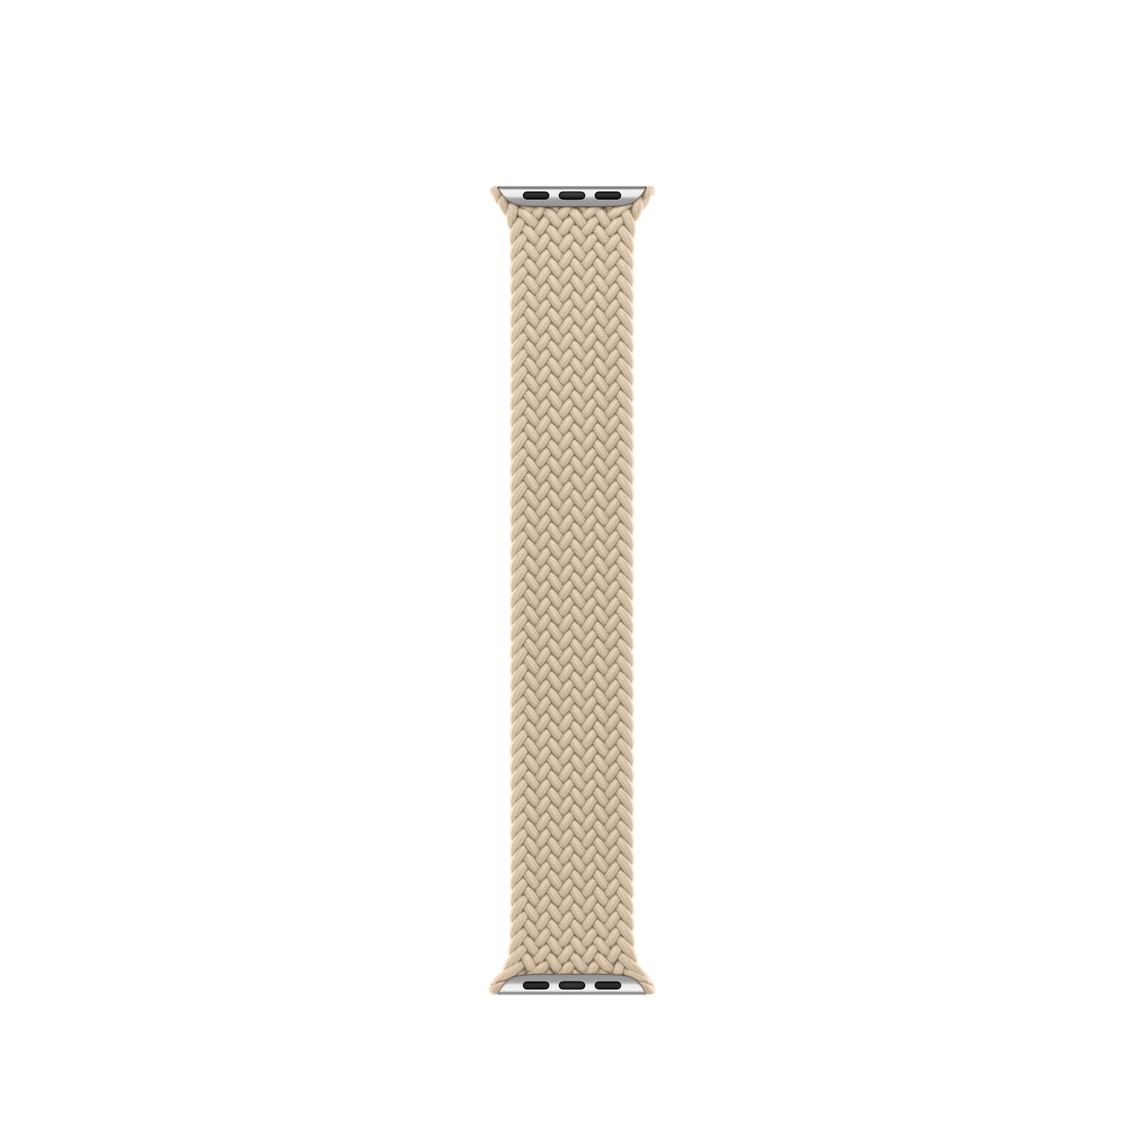 Beige Braided Solo Loop strap, woven polyester and silicone threads with no clasps or buckles